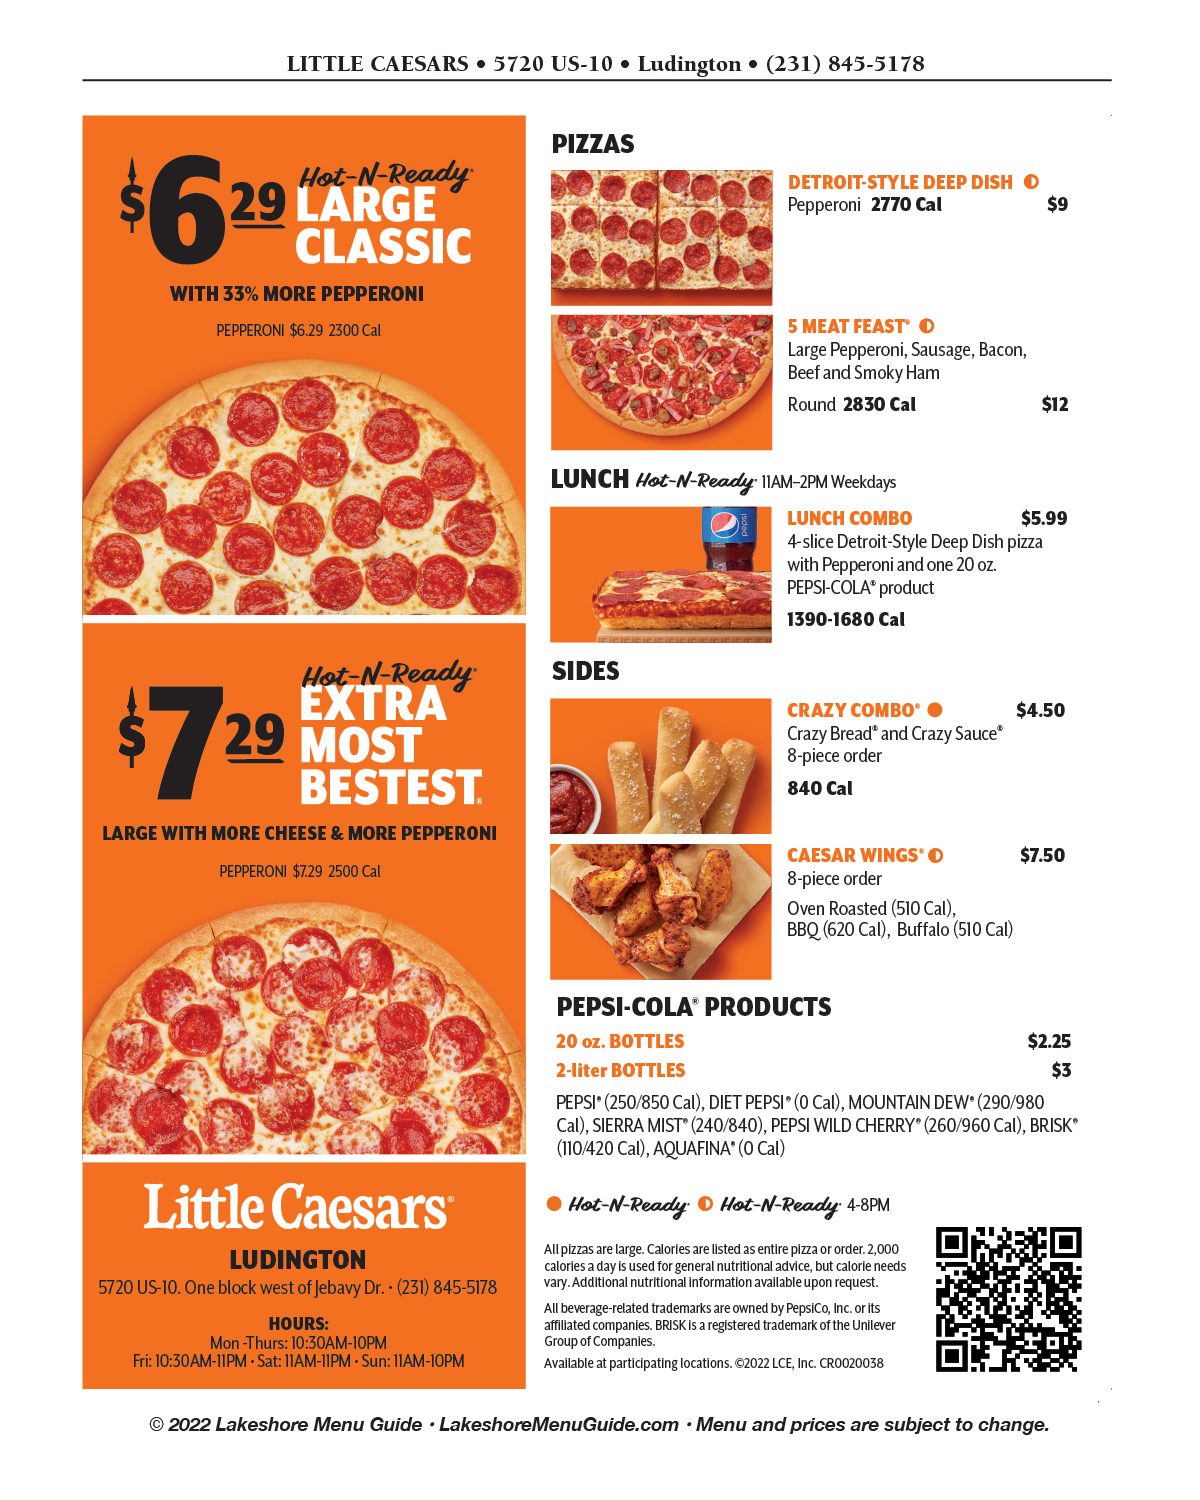 Menu for Little Caesars Pizza in Ludington from the Lakeshore Menu Guide